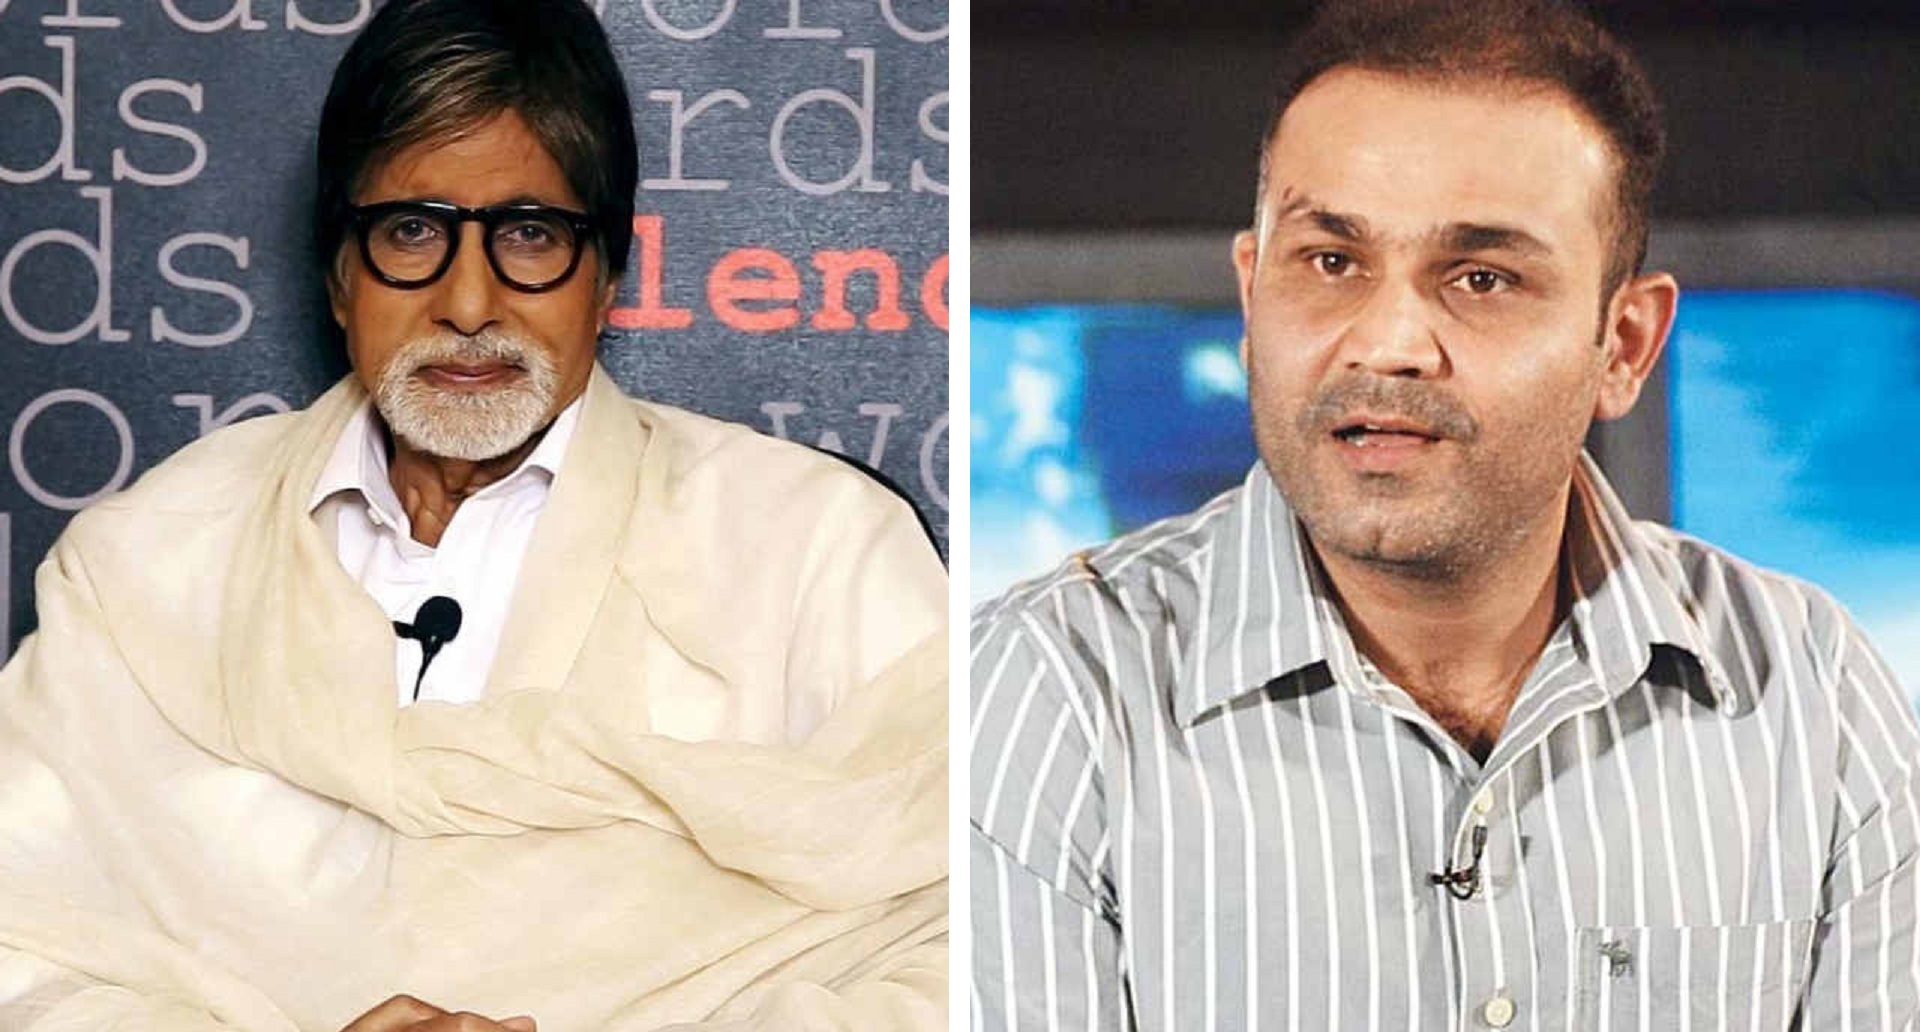 Big B Donates 5 Lakh Each To Families Of Pulwama Martyrs. Sehwag Pledges To Finance Their Kids’ Education